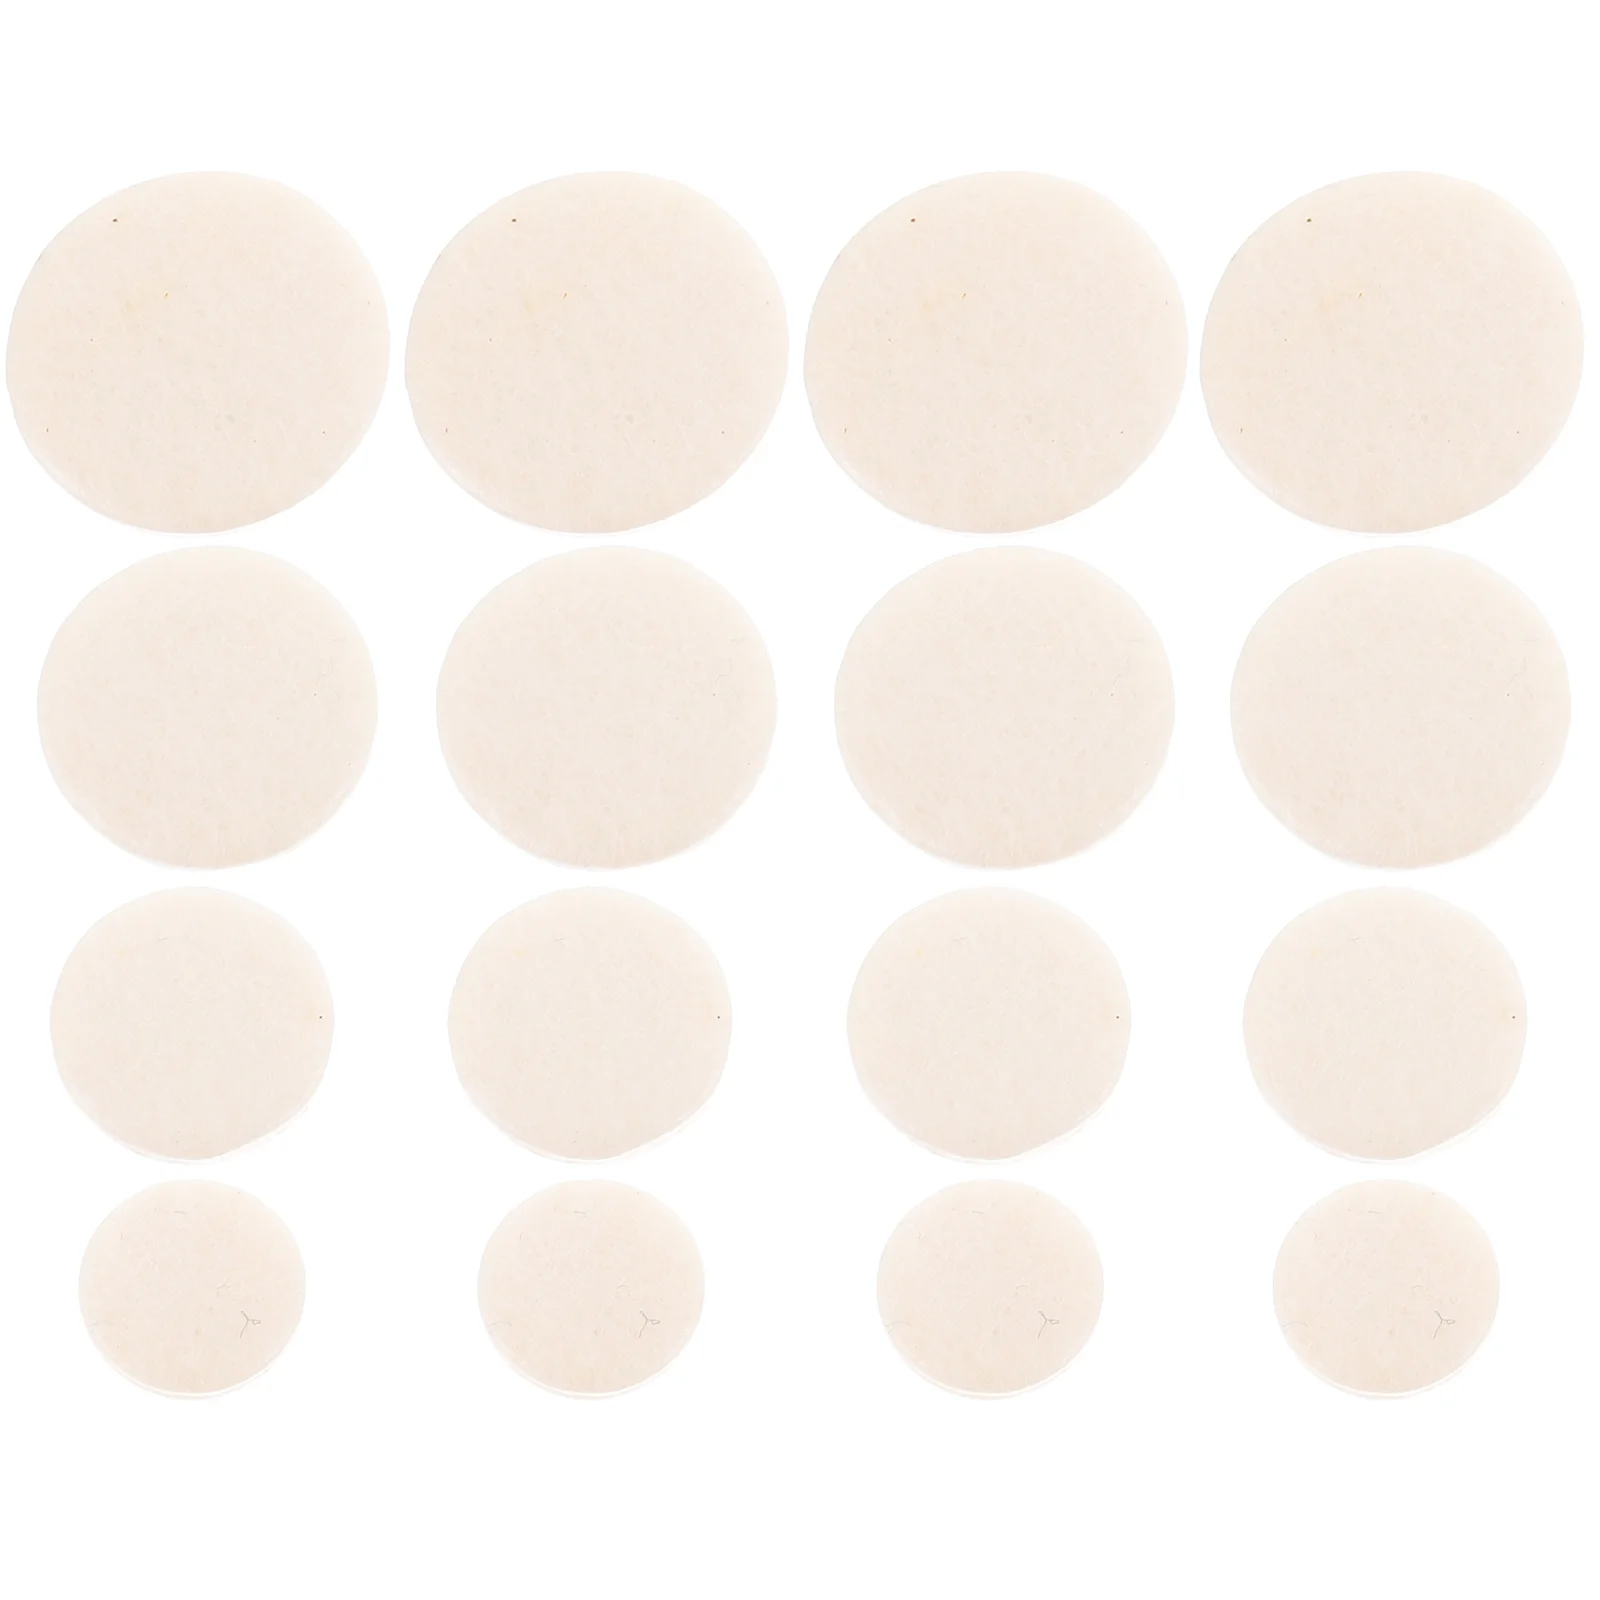 

17 Compact Premium Clarinet Pads Clarinet Patches Pads Cushions ( White )